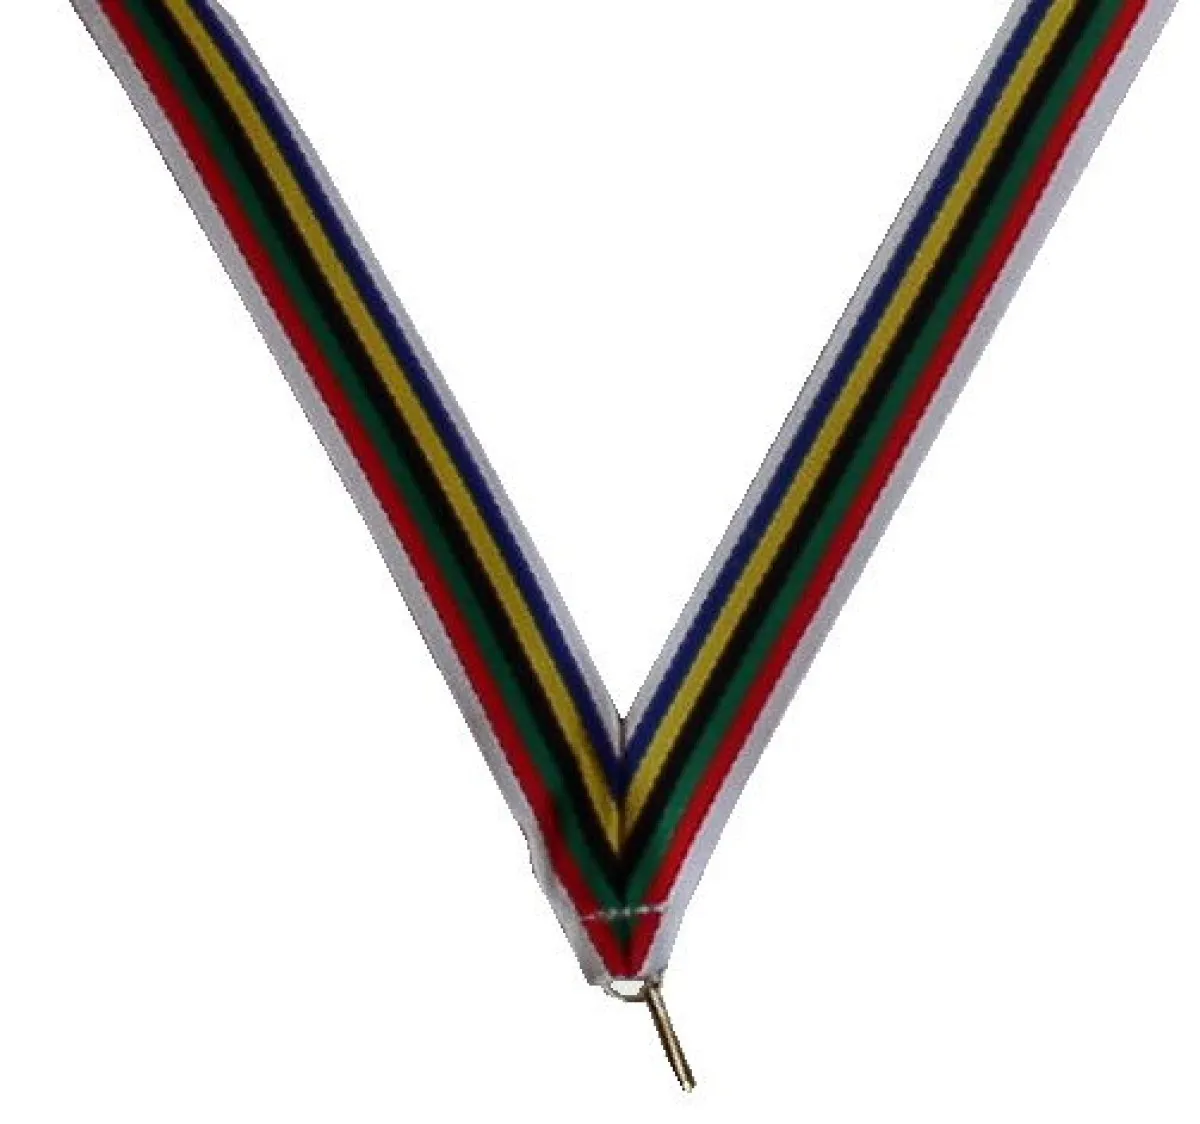 Medals ribbon with Olympia colors